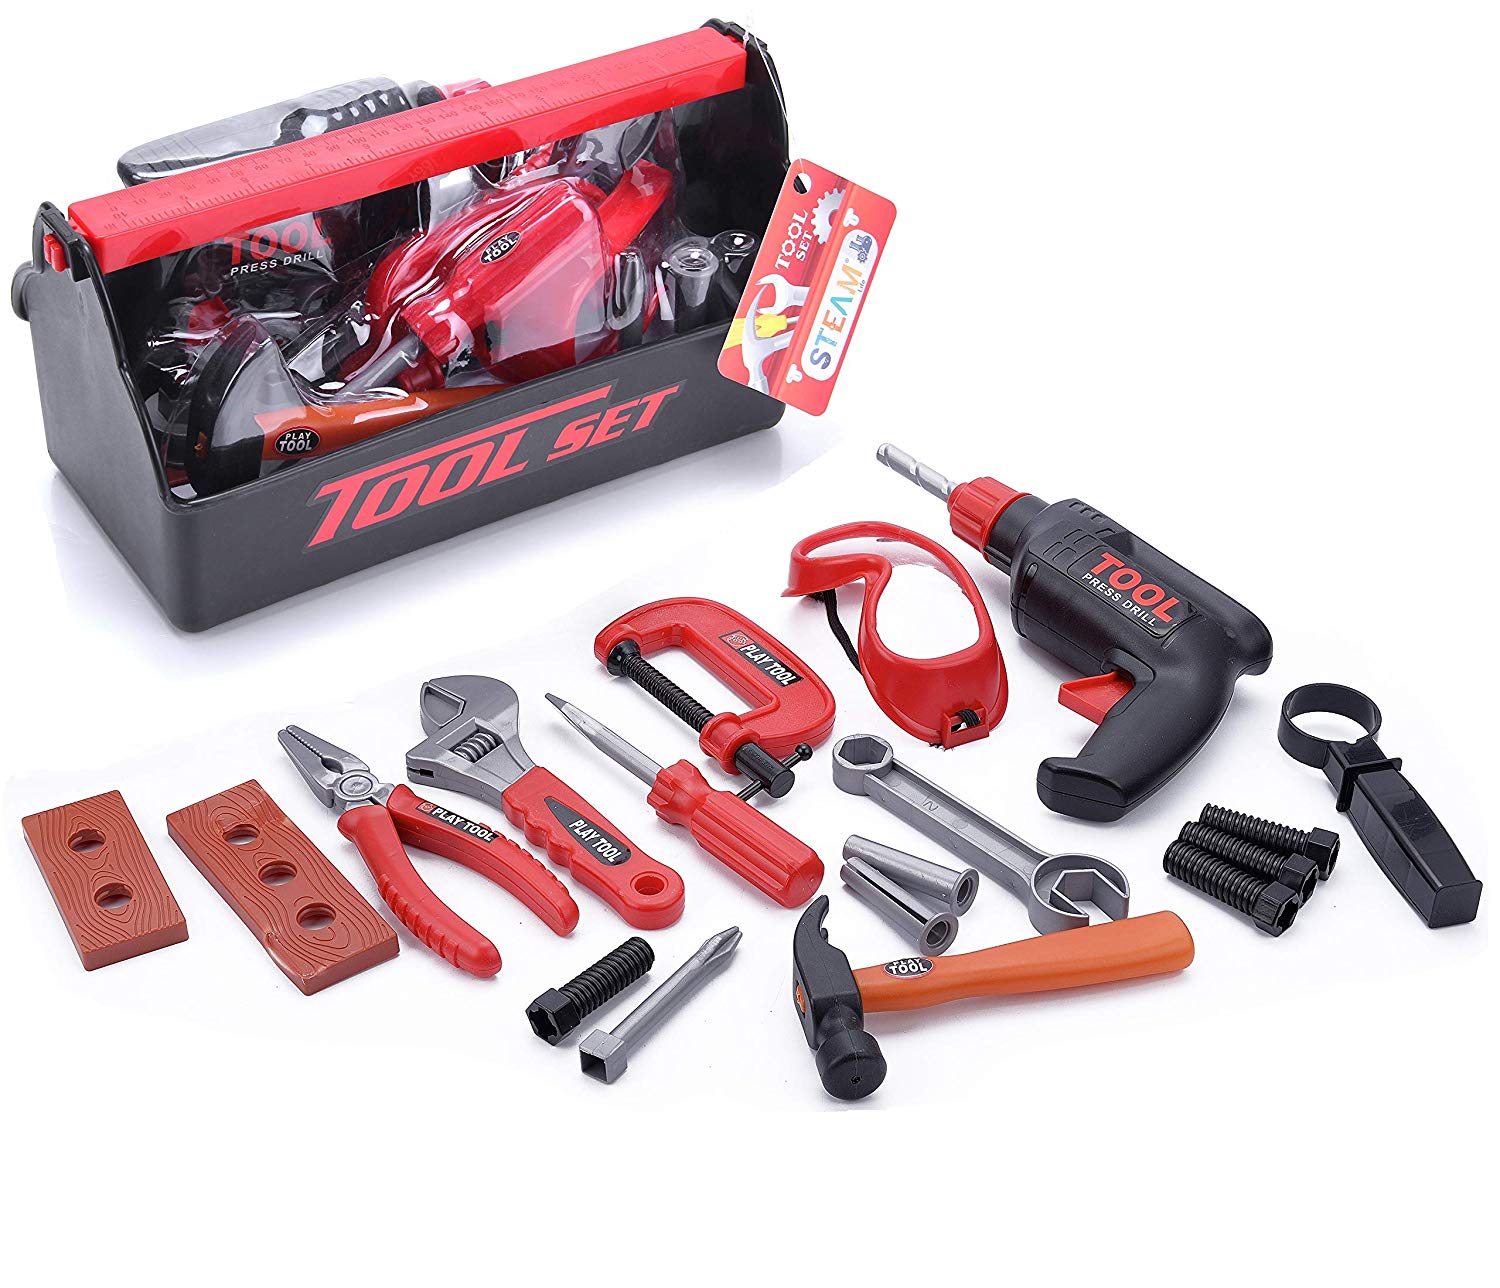 toy tool kit for 3 year old